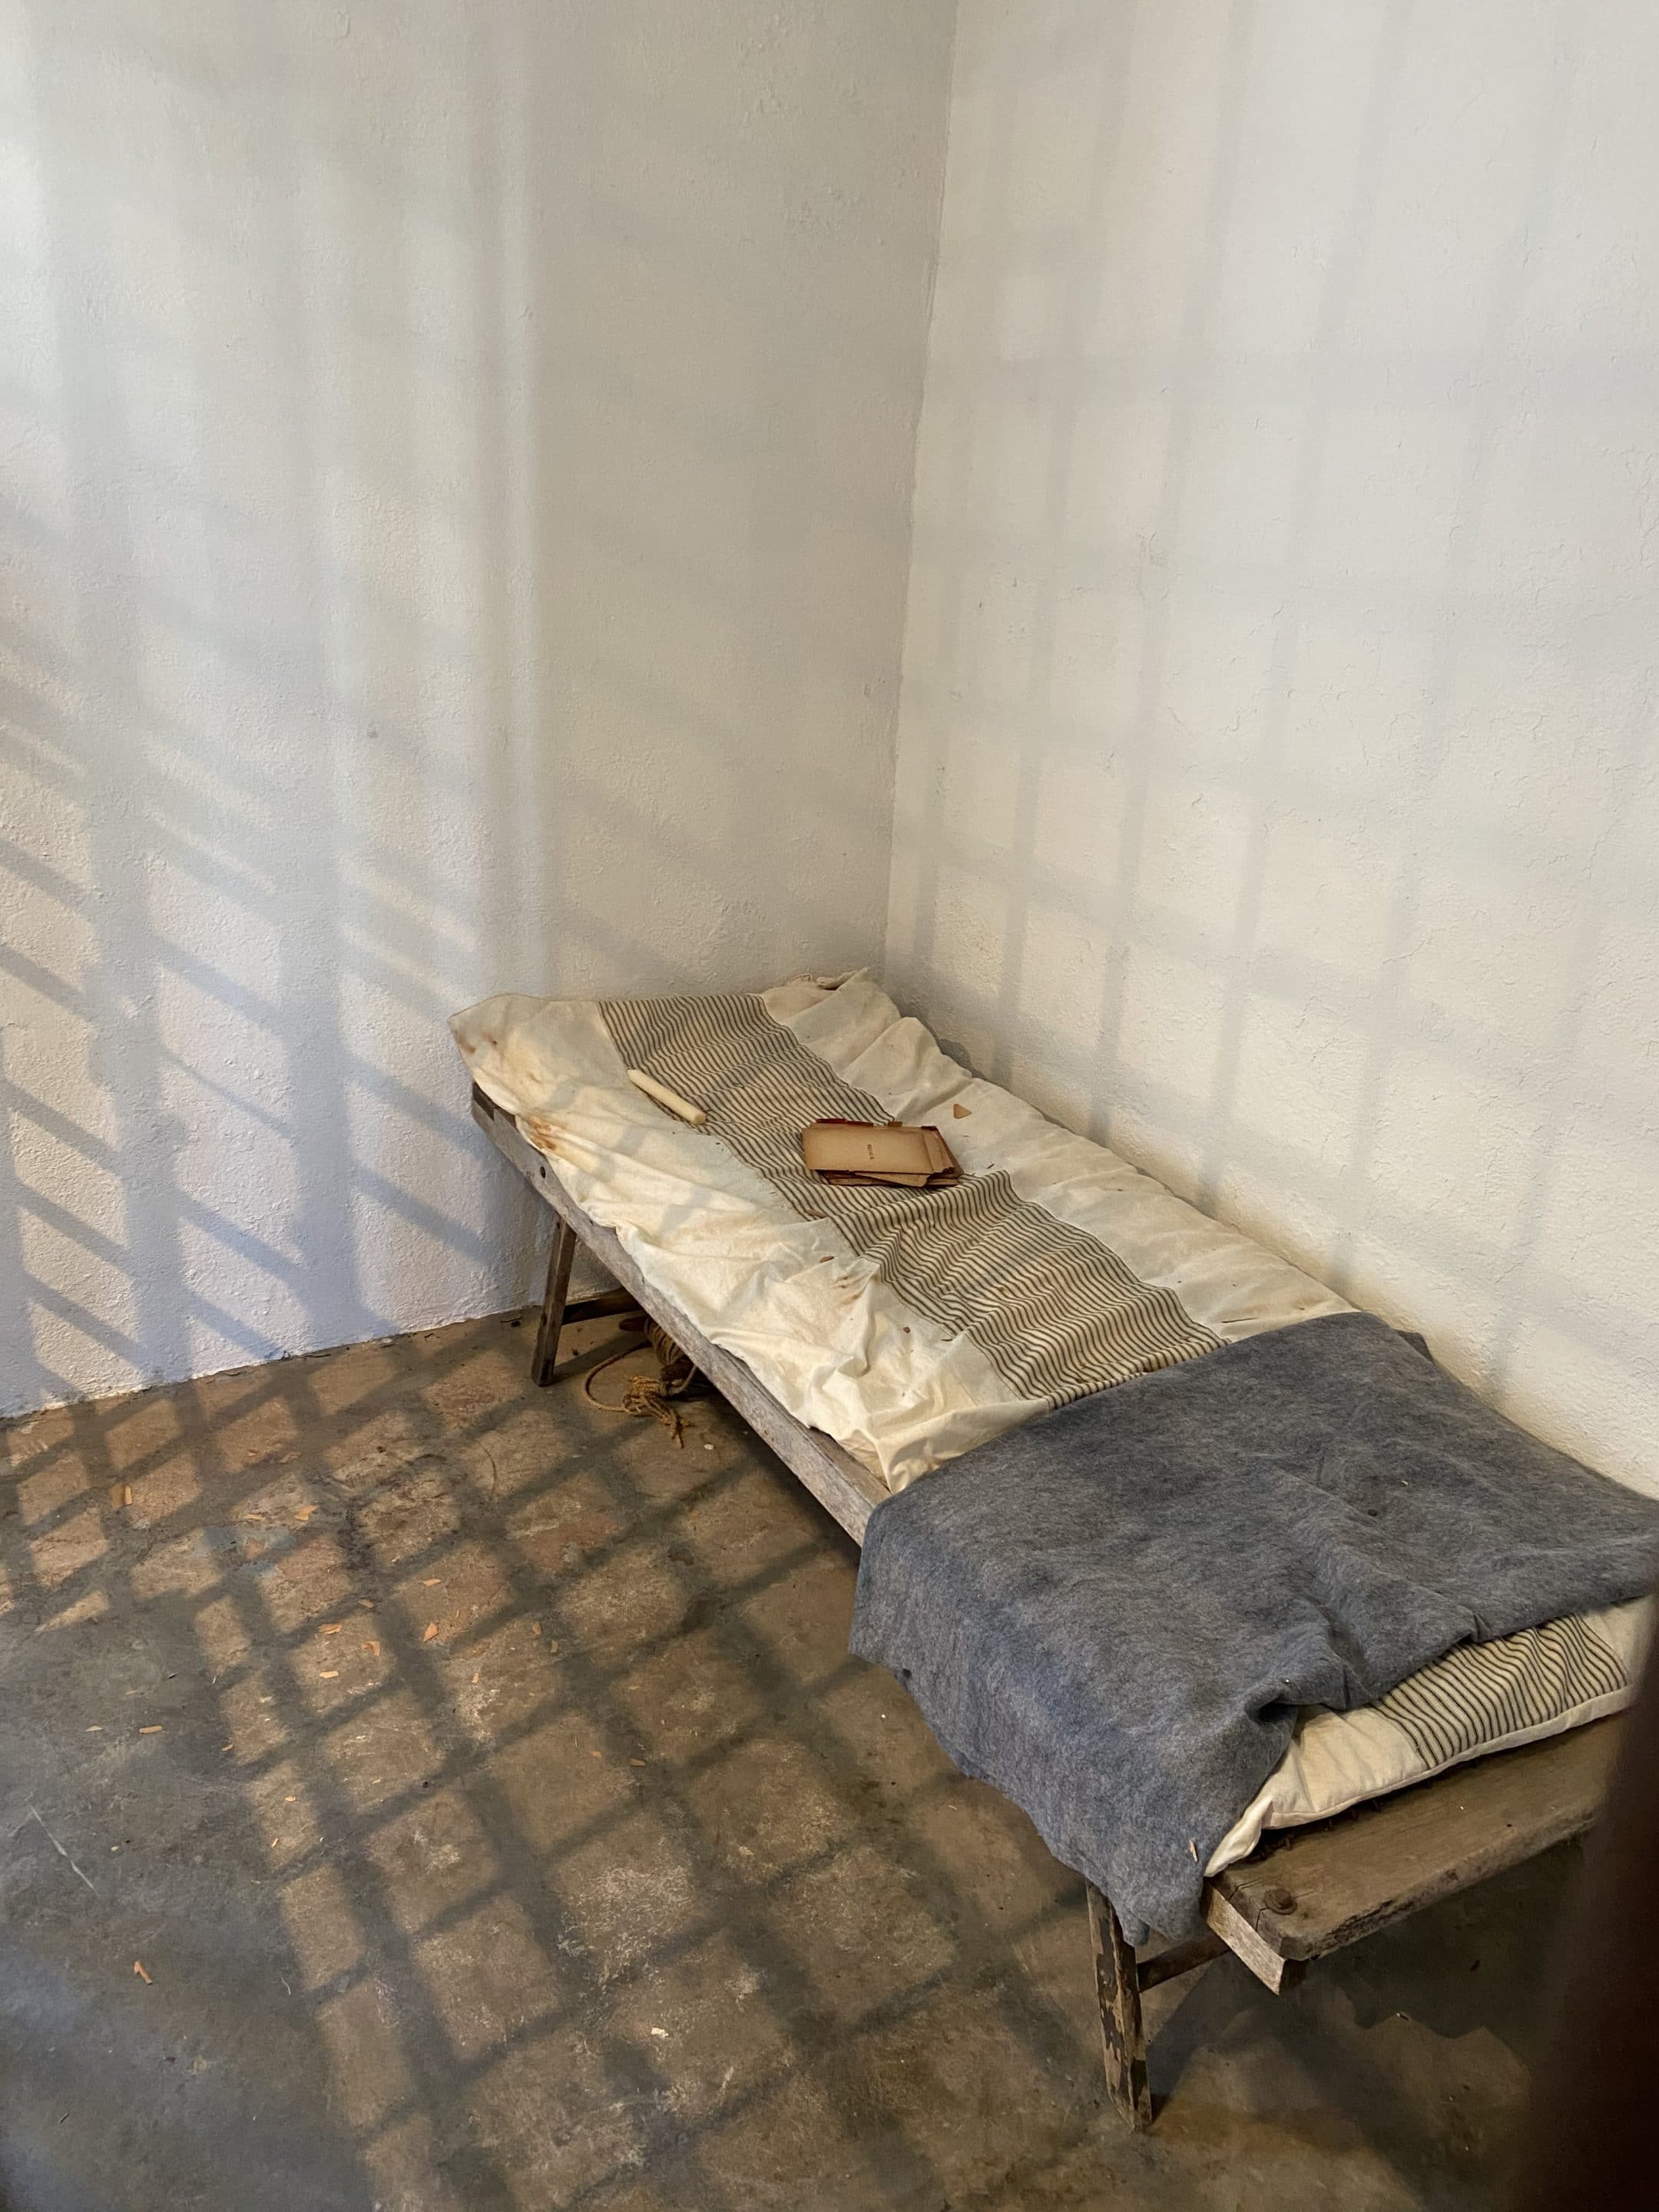 Cot in a prison cell